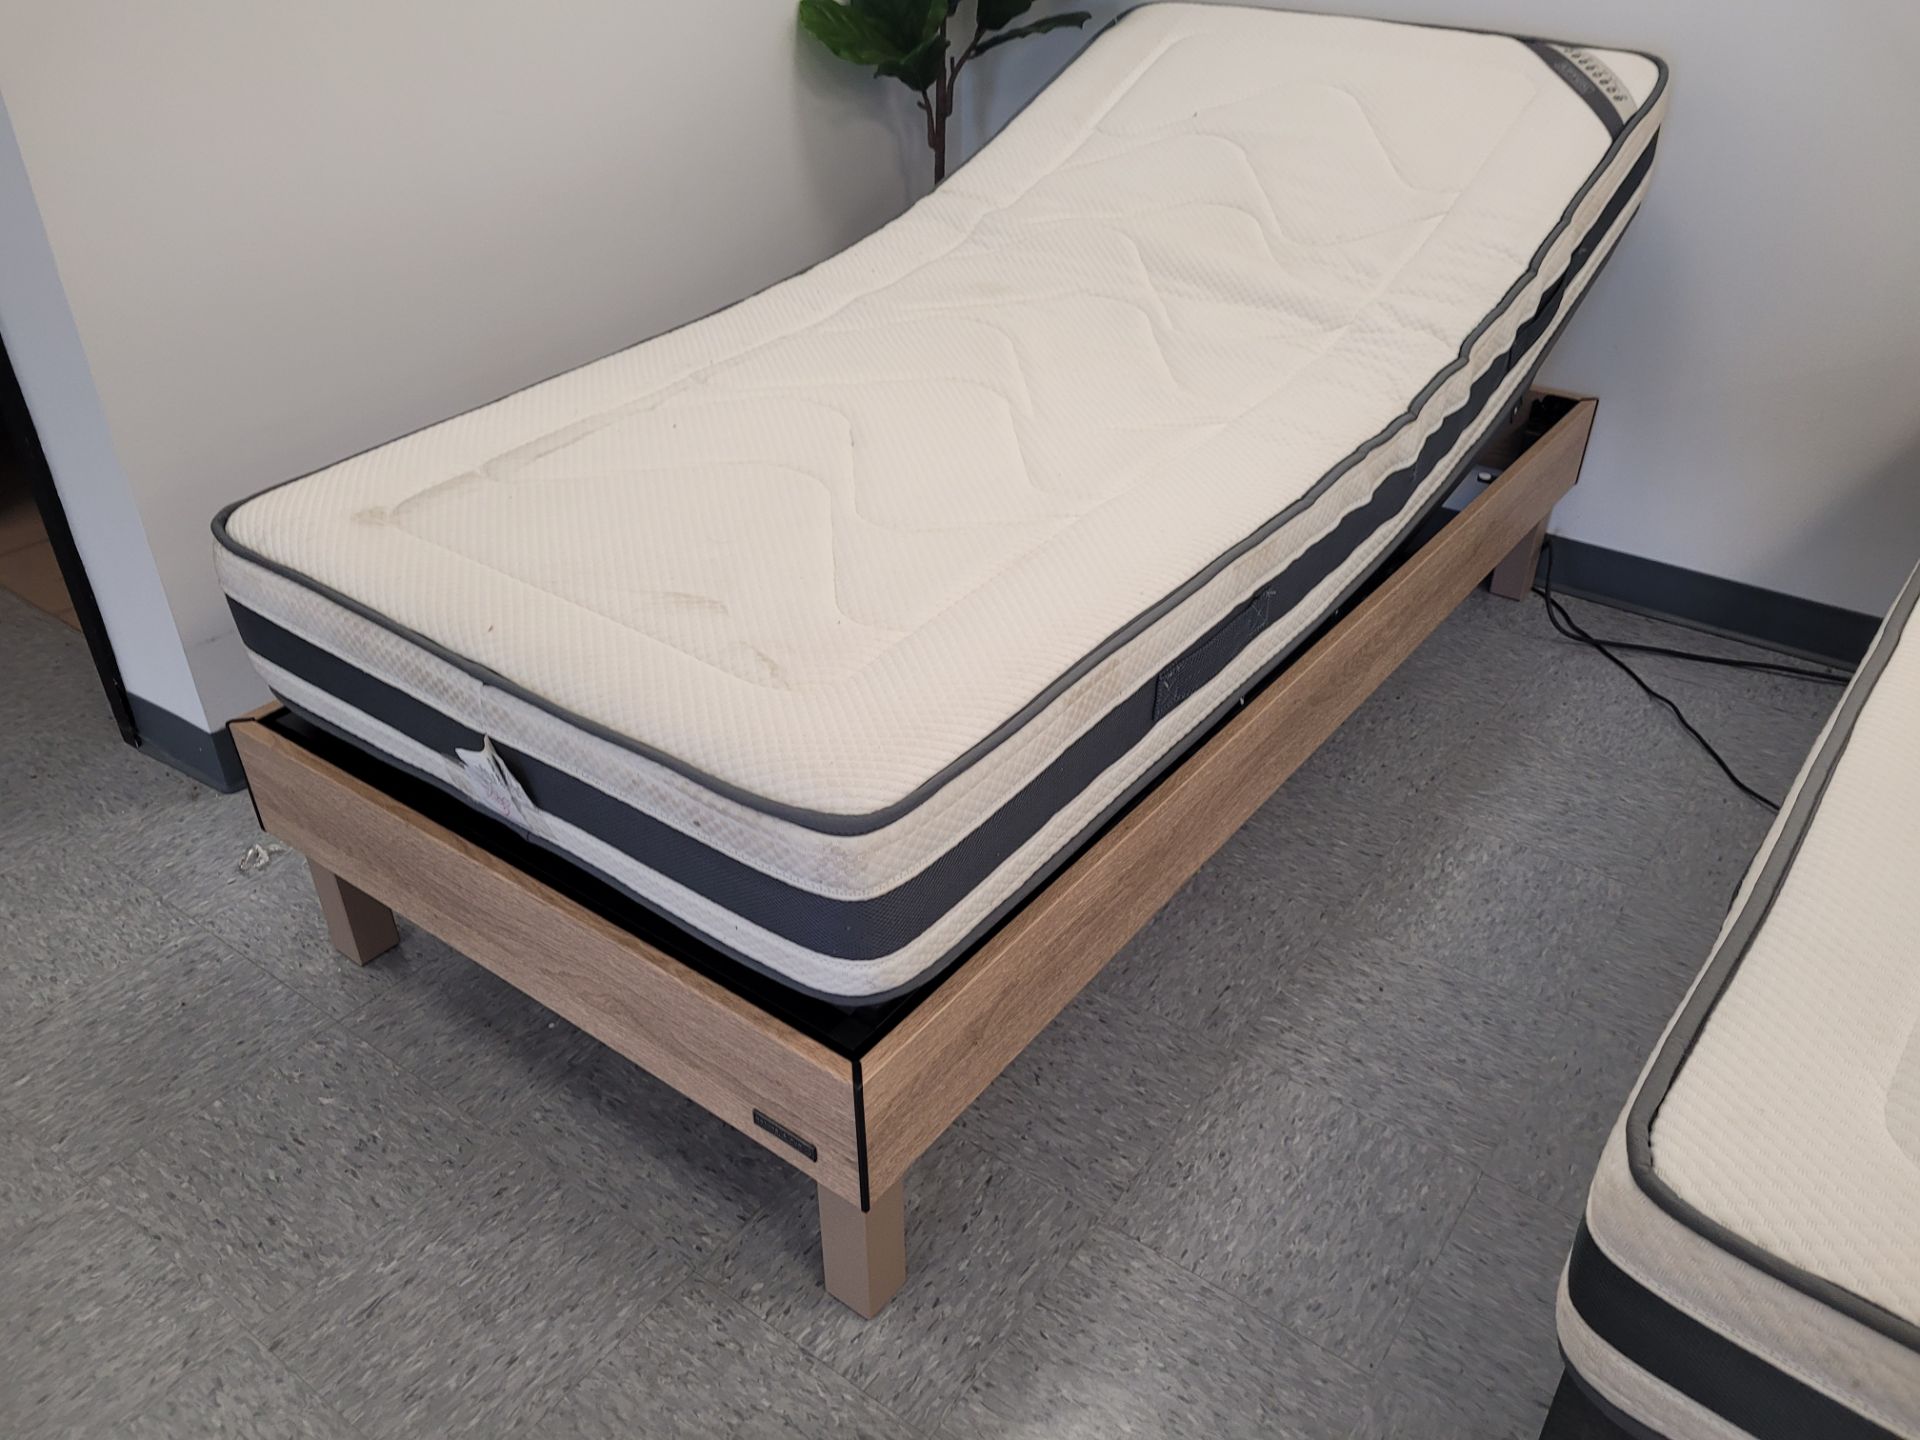 NATURE & PUR Memory Foam Mattress mod. ROYAL LUXE V2, size: 1/2 Queen, 30" x 79.5", hypoallergenic, - Image 3 of 6